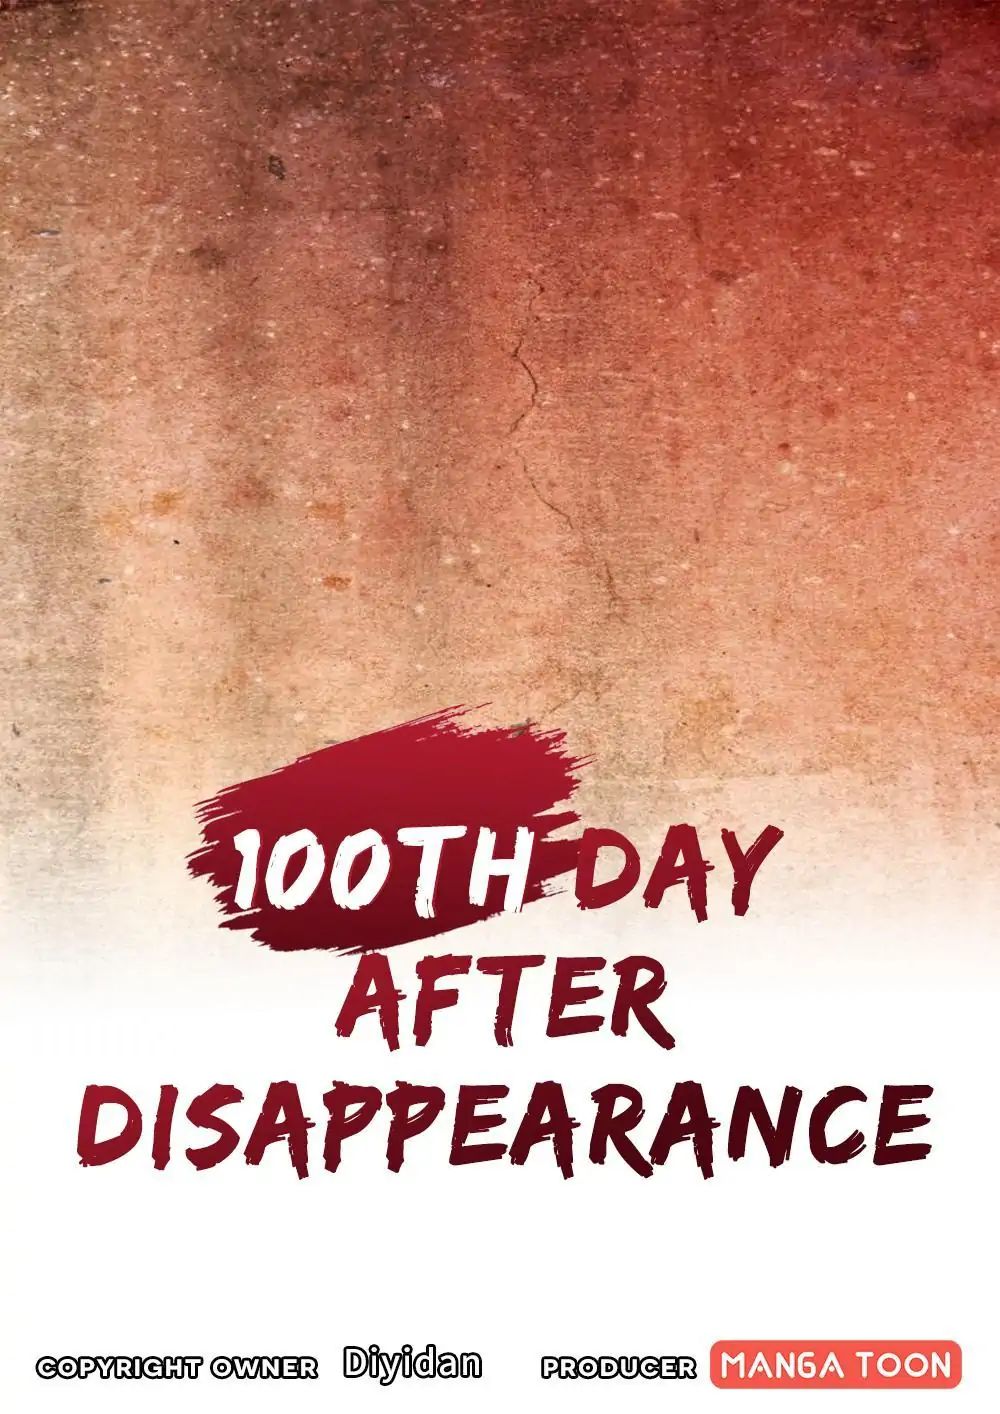 Day 100 of My Sister's Disappearance Chapter 26